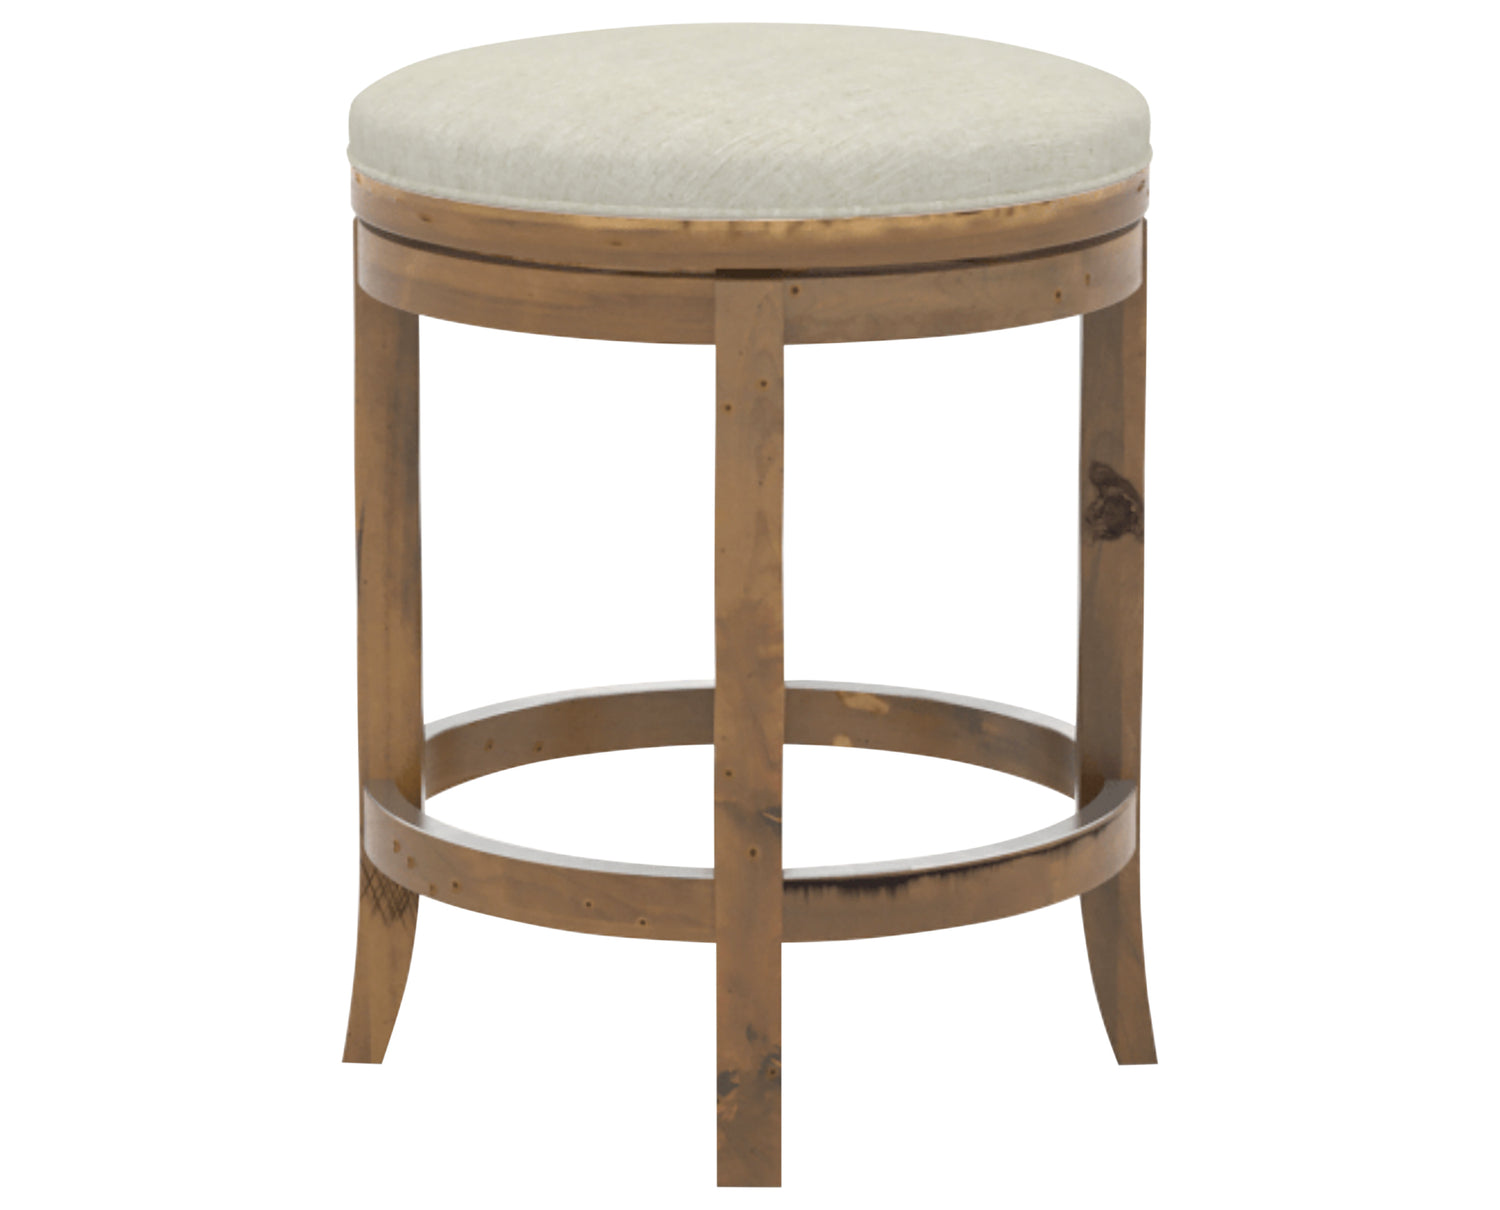 Oak Washed & Fabric TW | Canadel Champlain Counter Stool 8004 | Valley Ridge Furniture